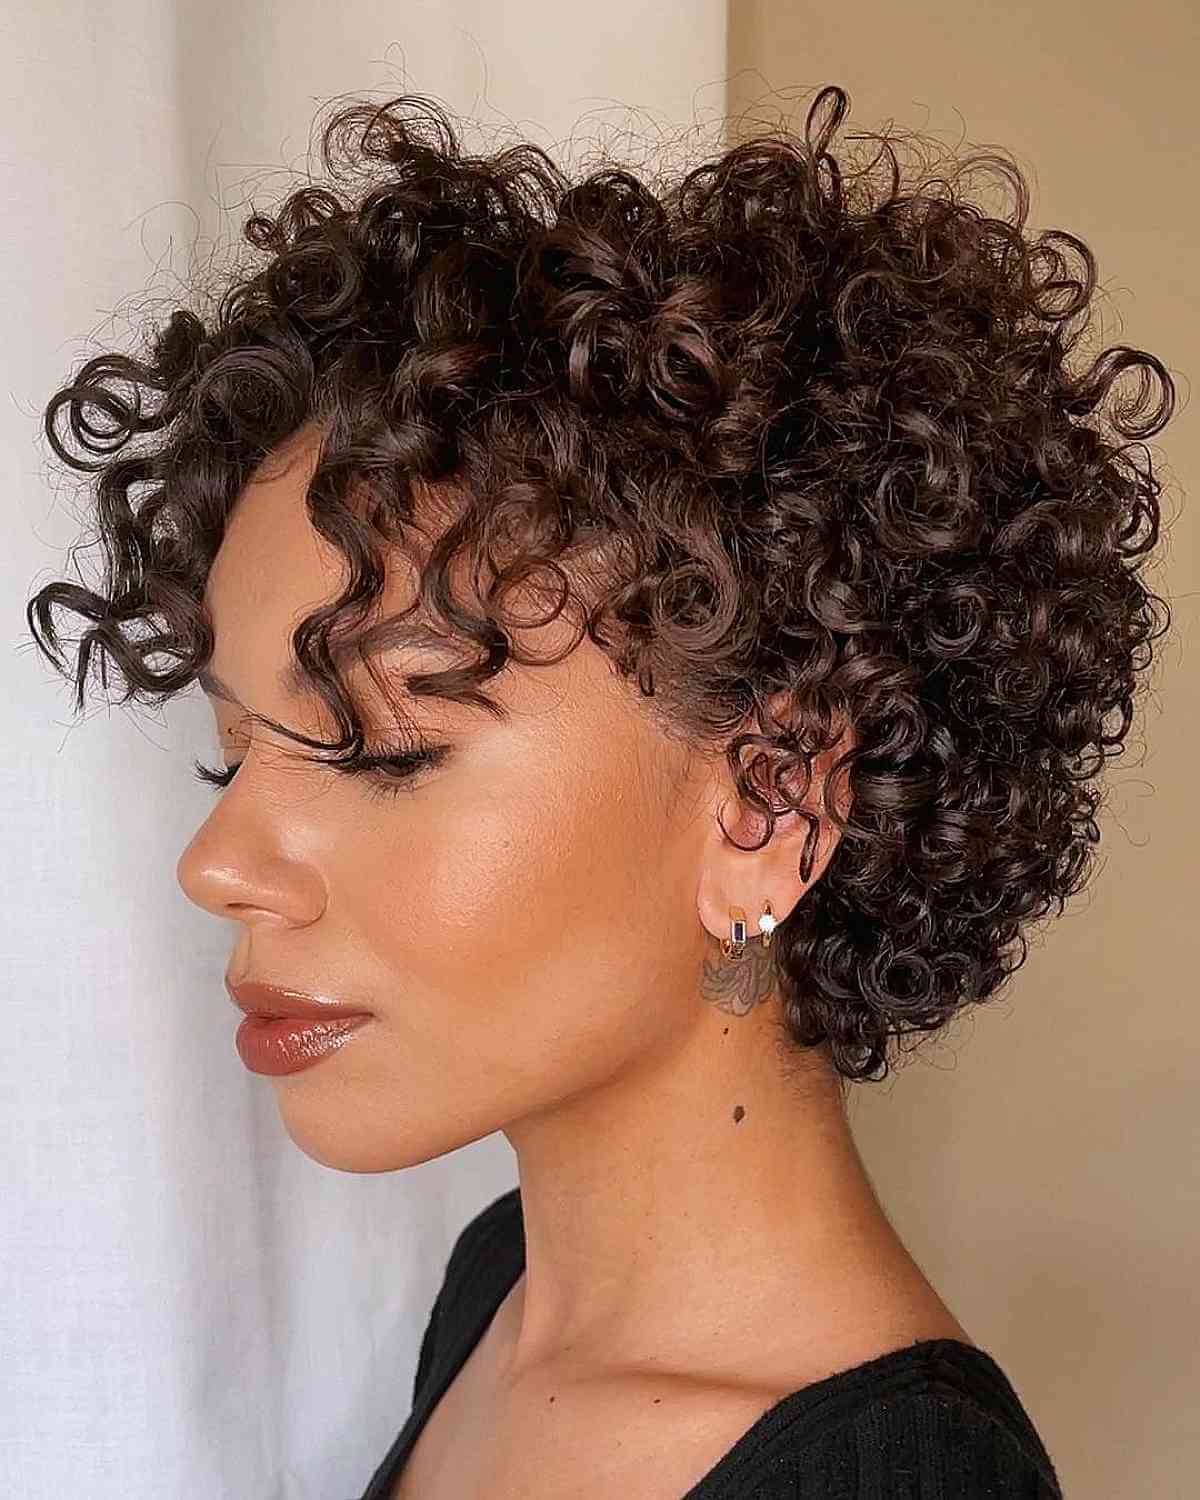 77 Best Ways to Pair Curly Hair with Bangs